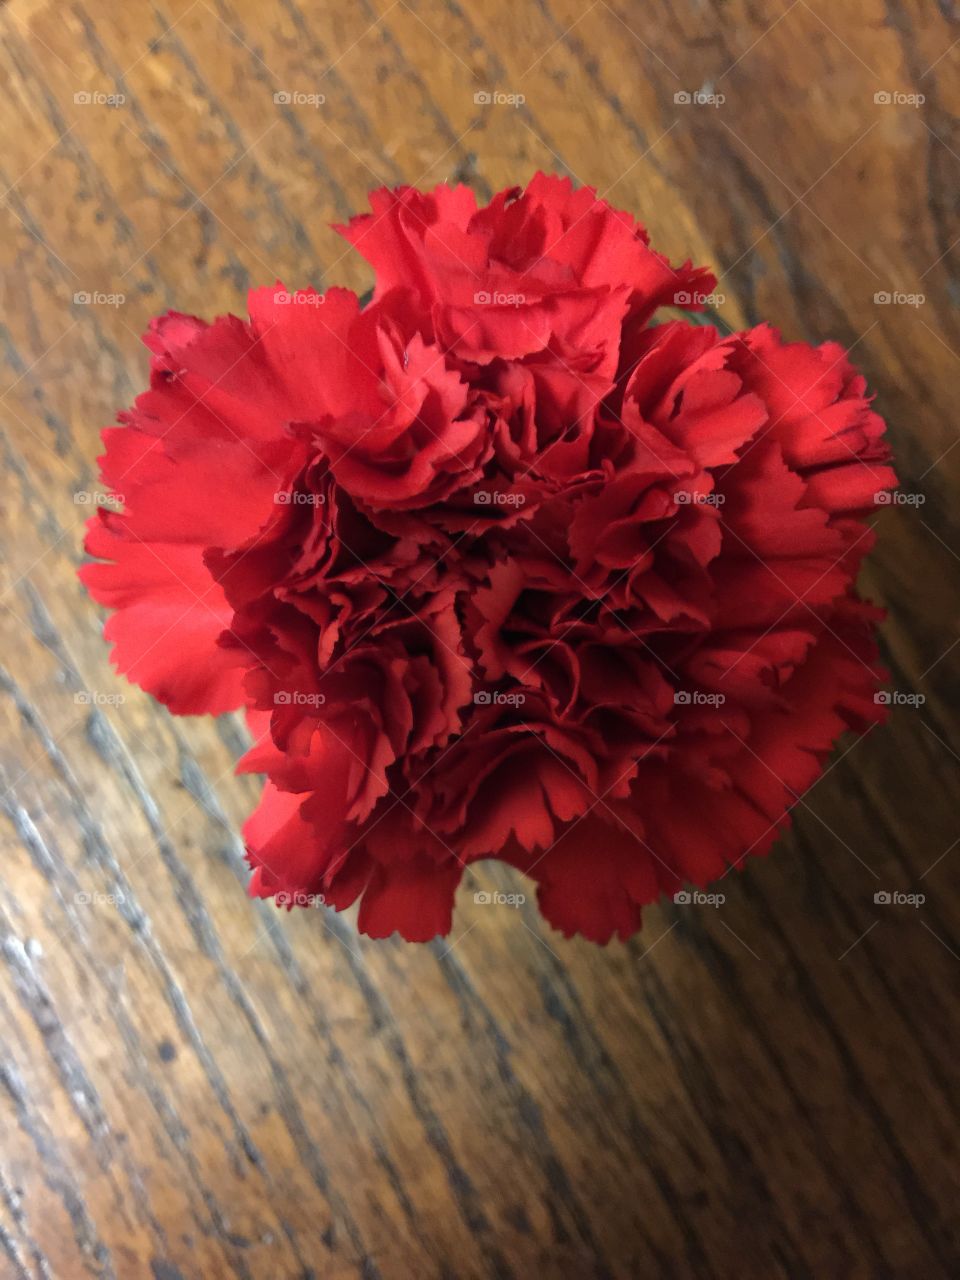 Red Carnation part of my birthday bouquet love them so sweet and spicy!